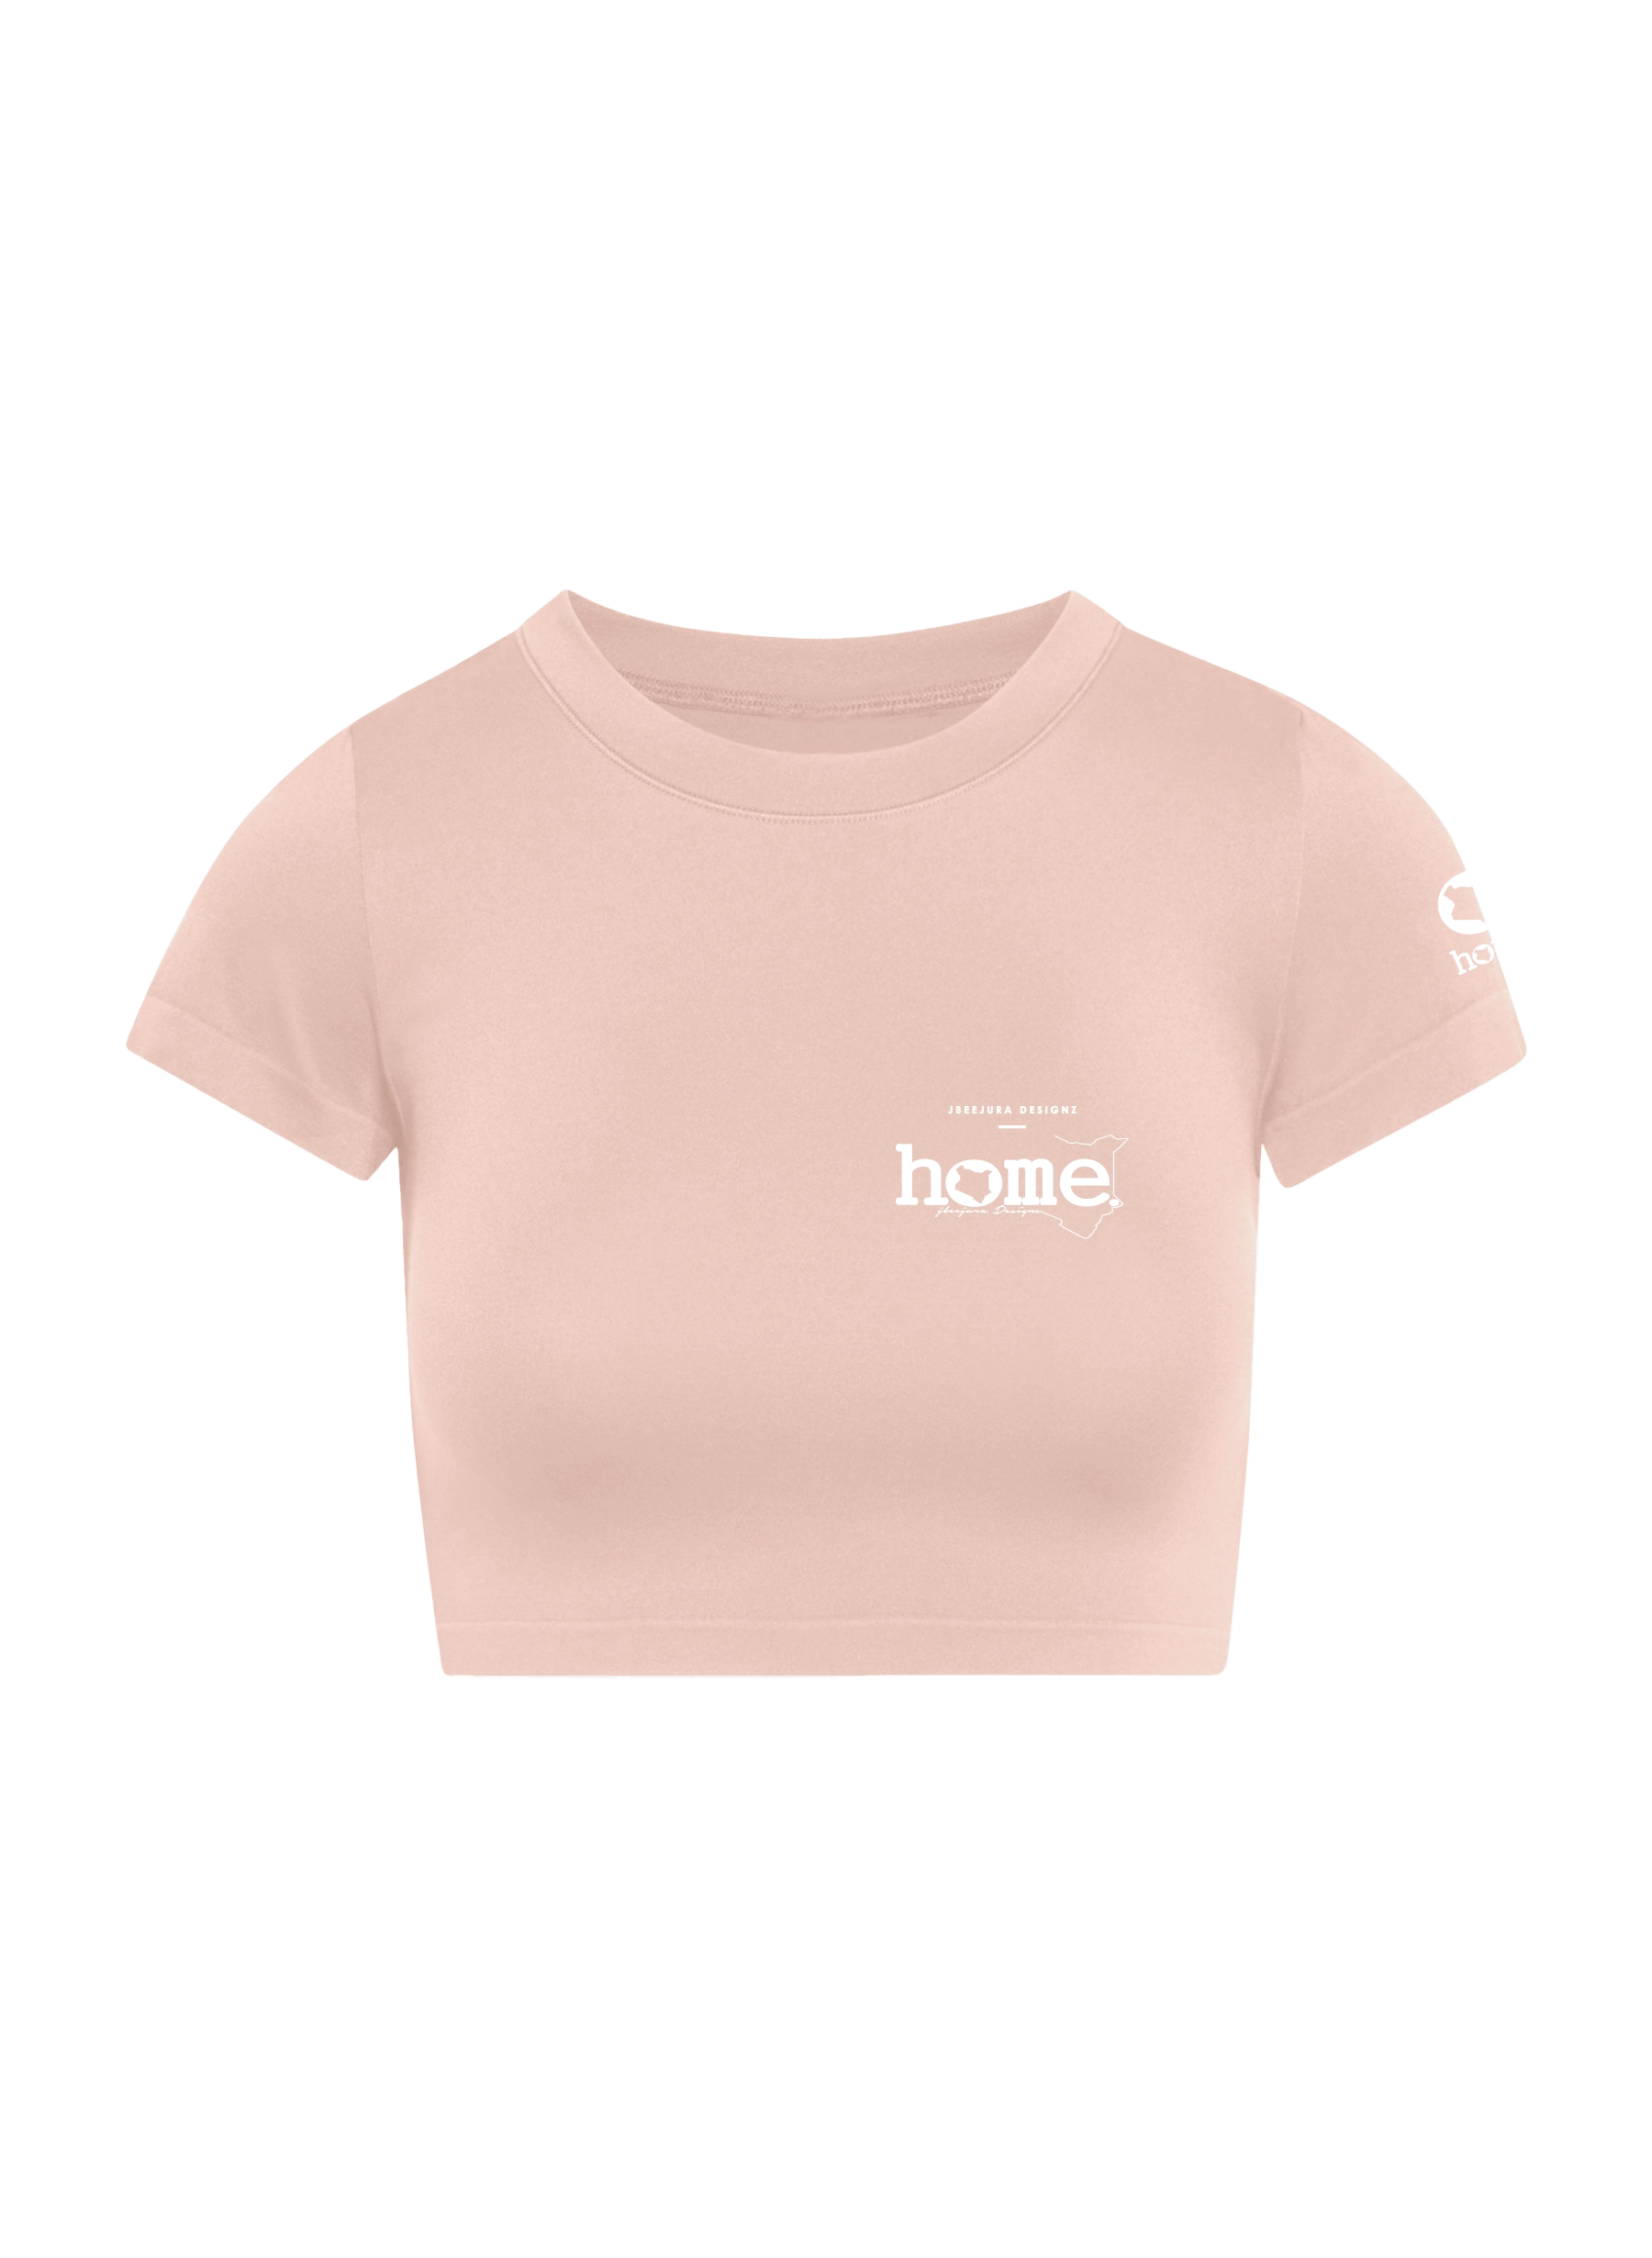 home_254 SHORT SLEEVED PEACH CROPPED ARIA TEE WITH A WHITE 3D WORDS PRINT 